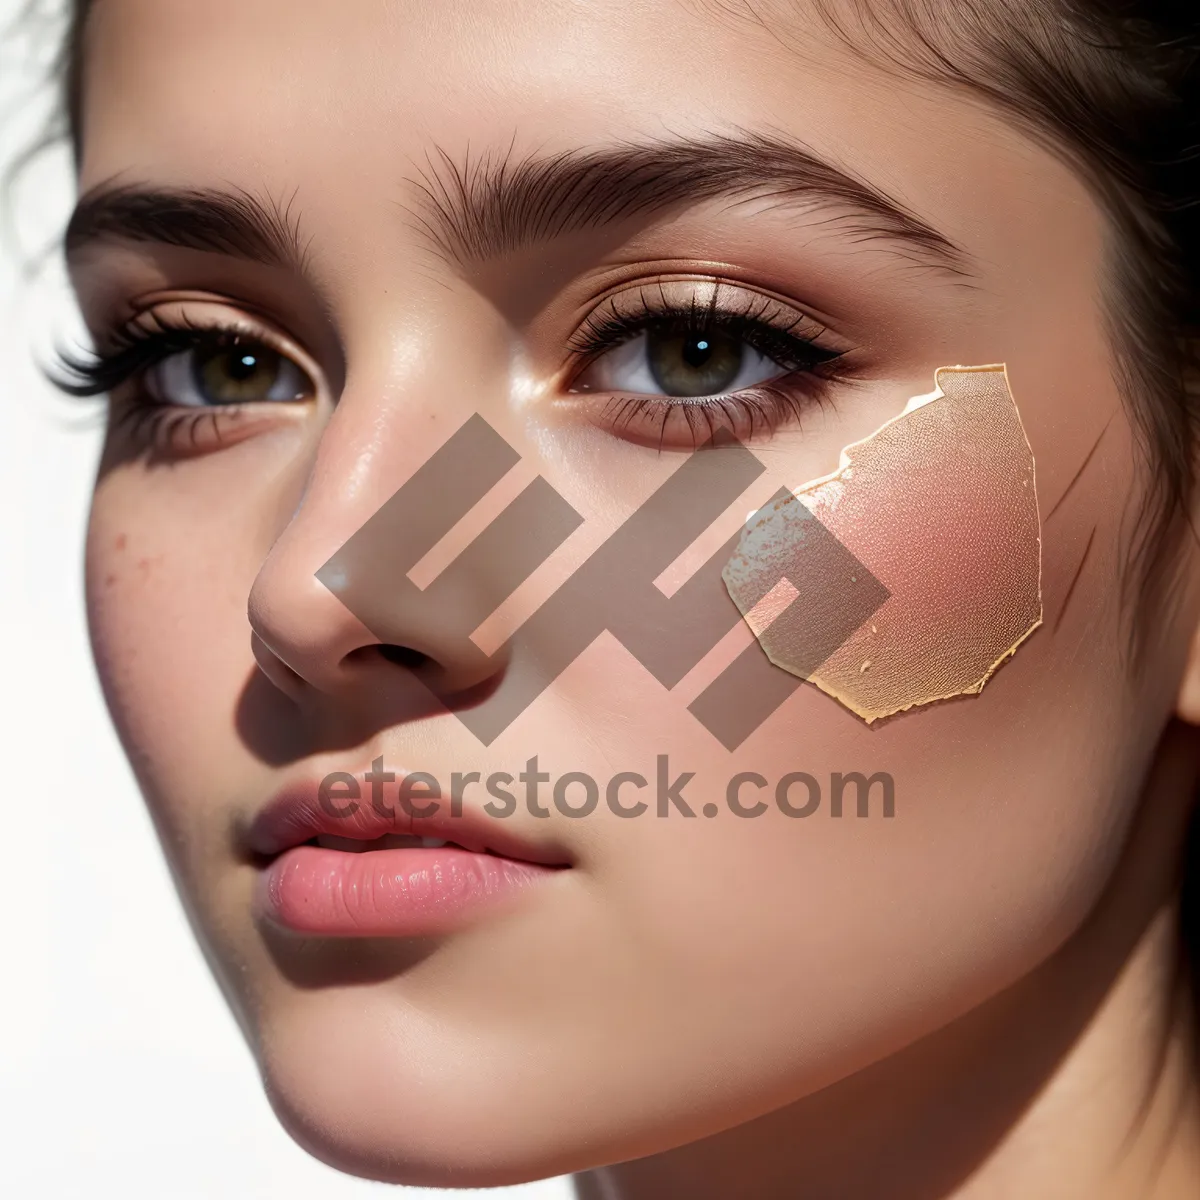 Picture of Flawless Beauty: Attractive Model with Stunning Makeup